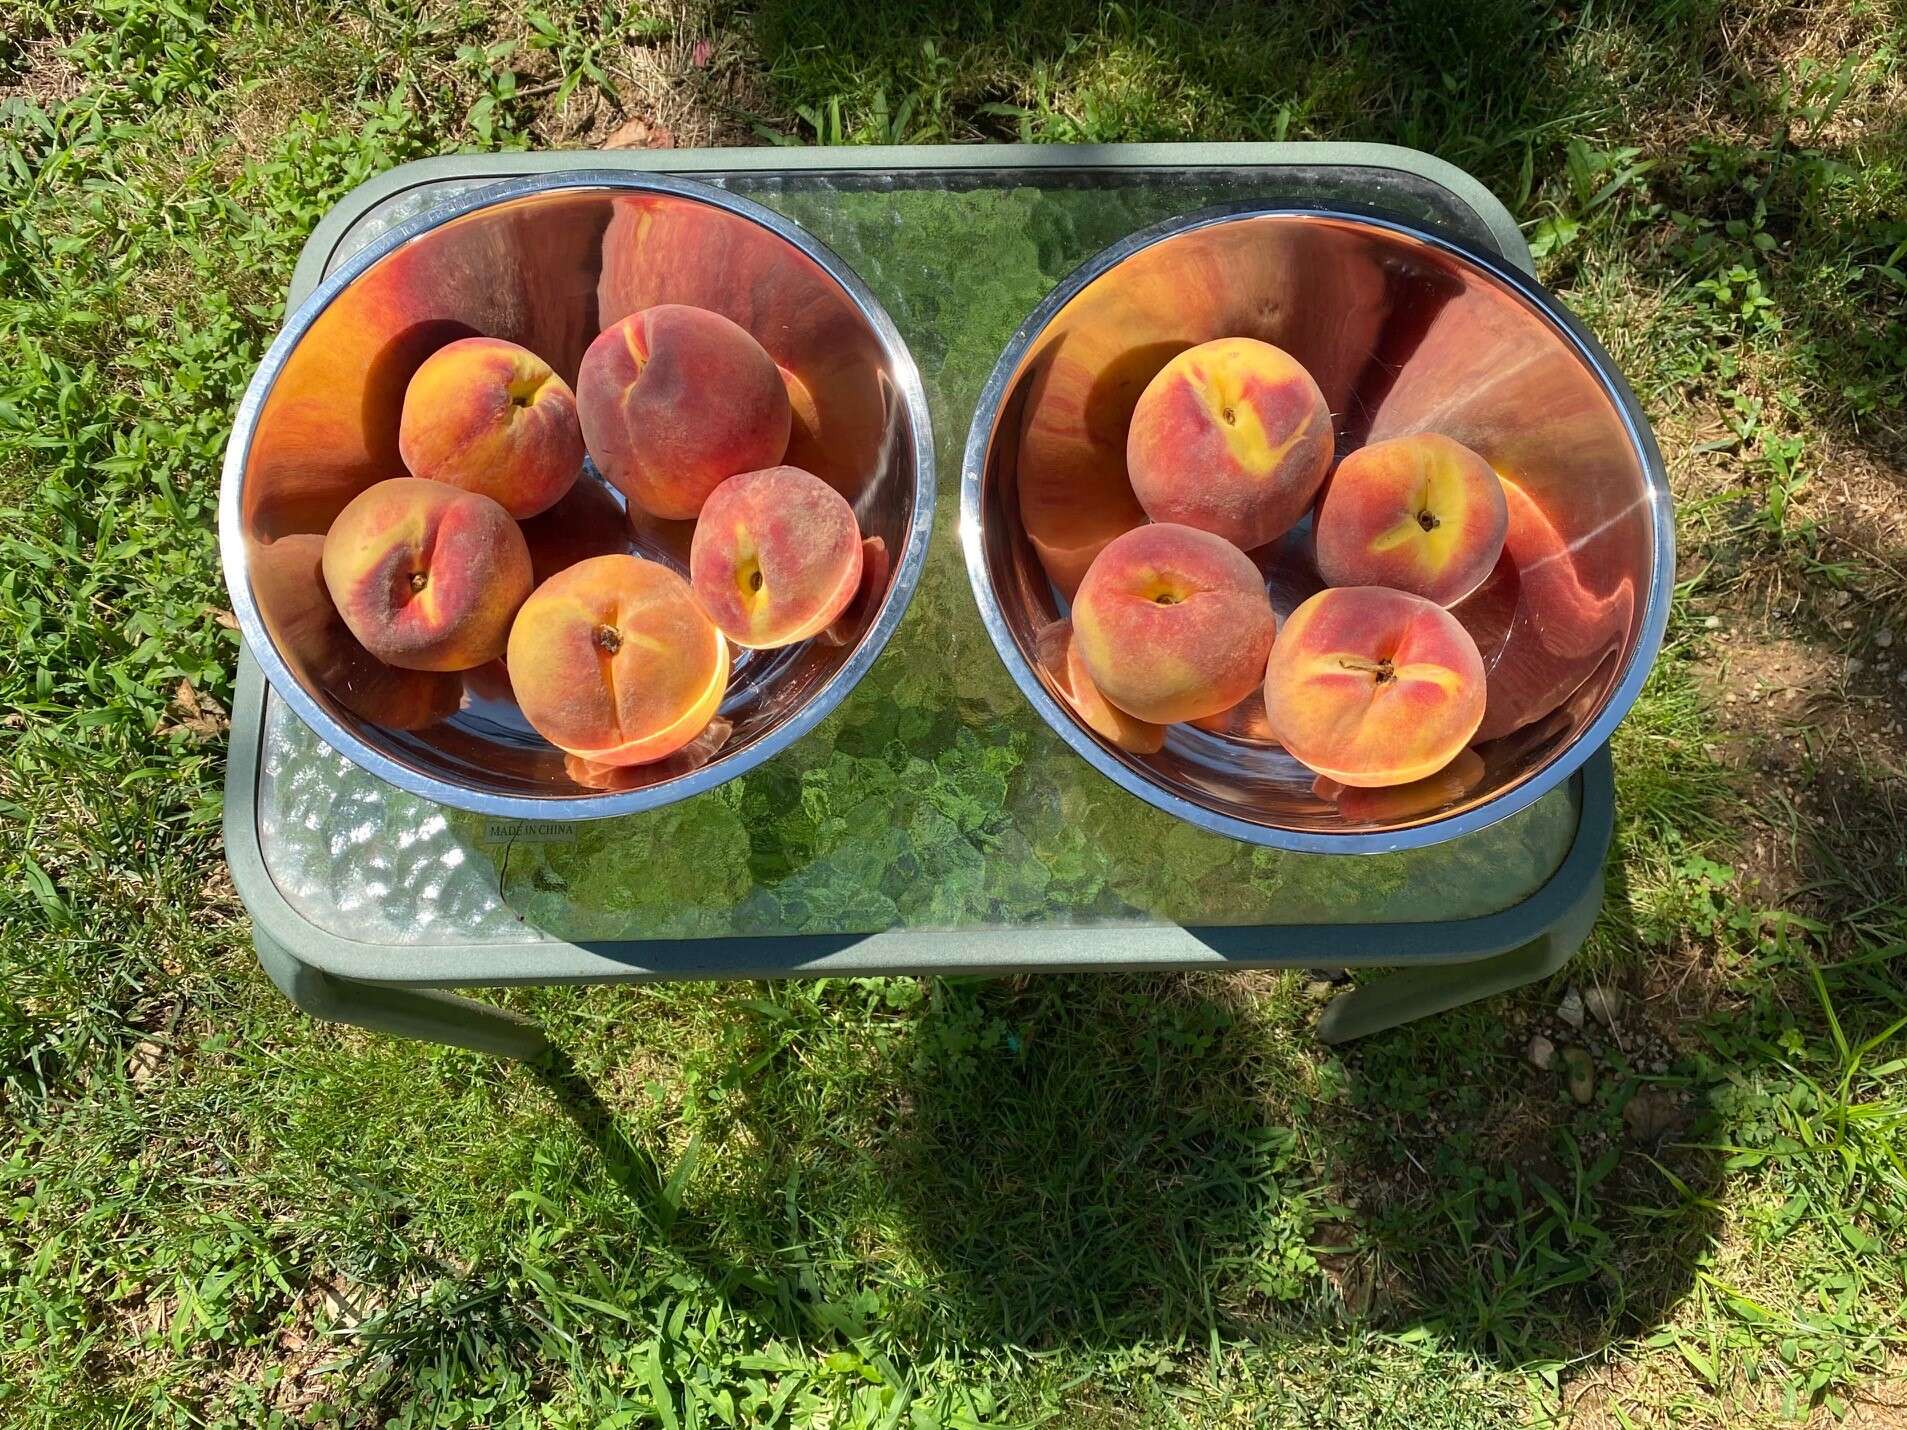 How to Ripen Peaches Perfectly